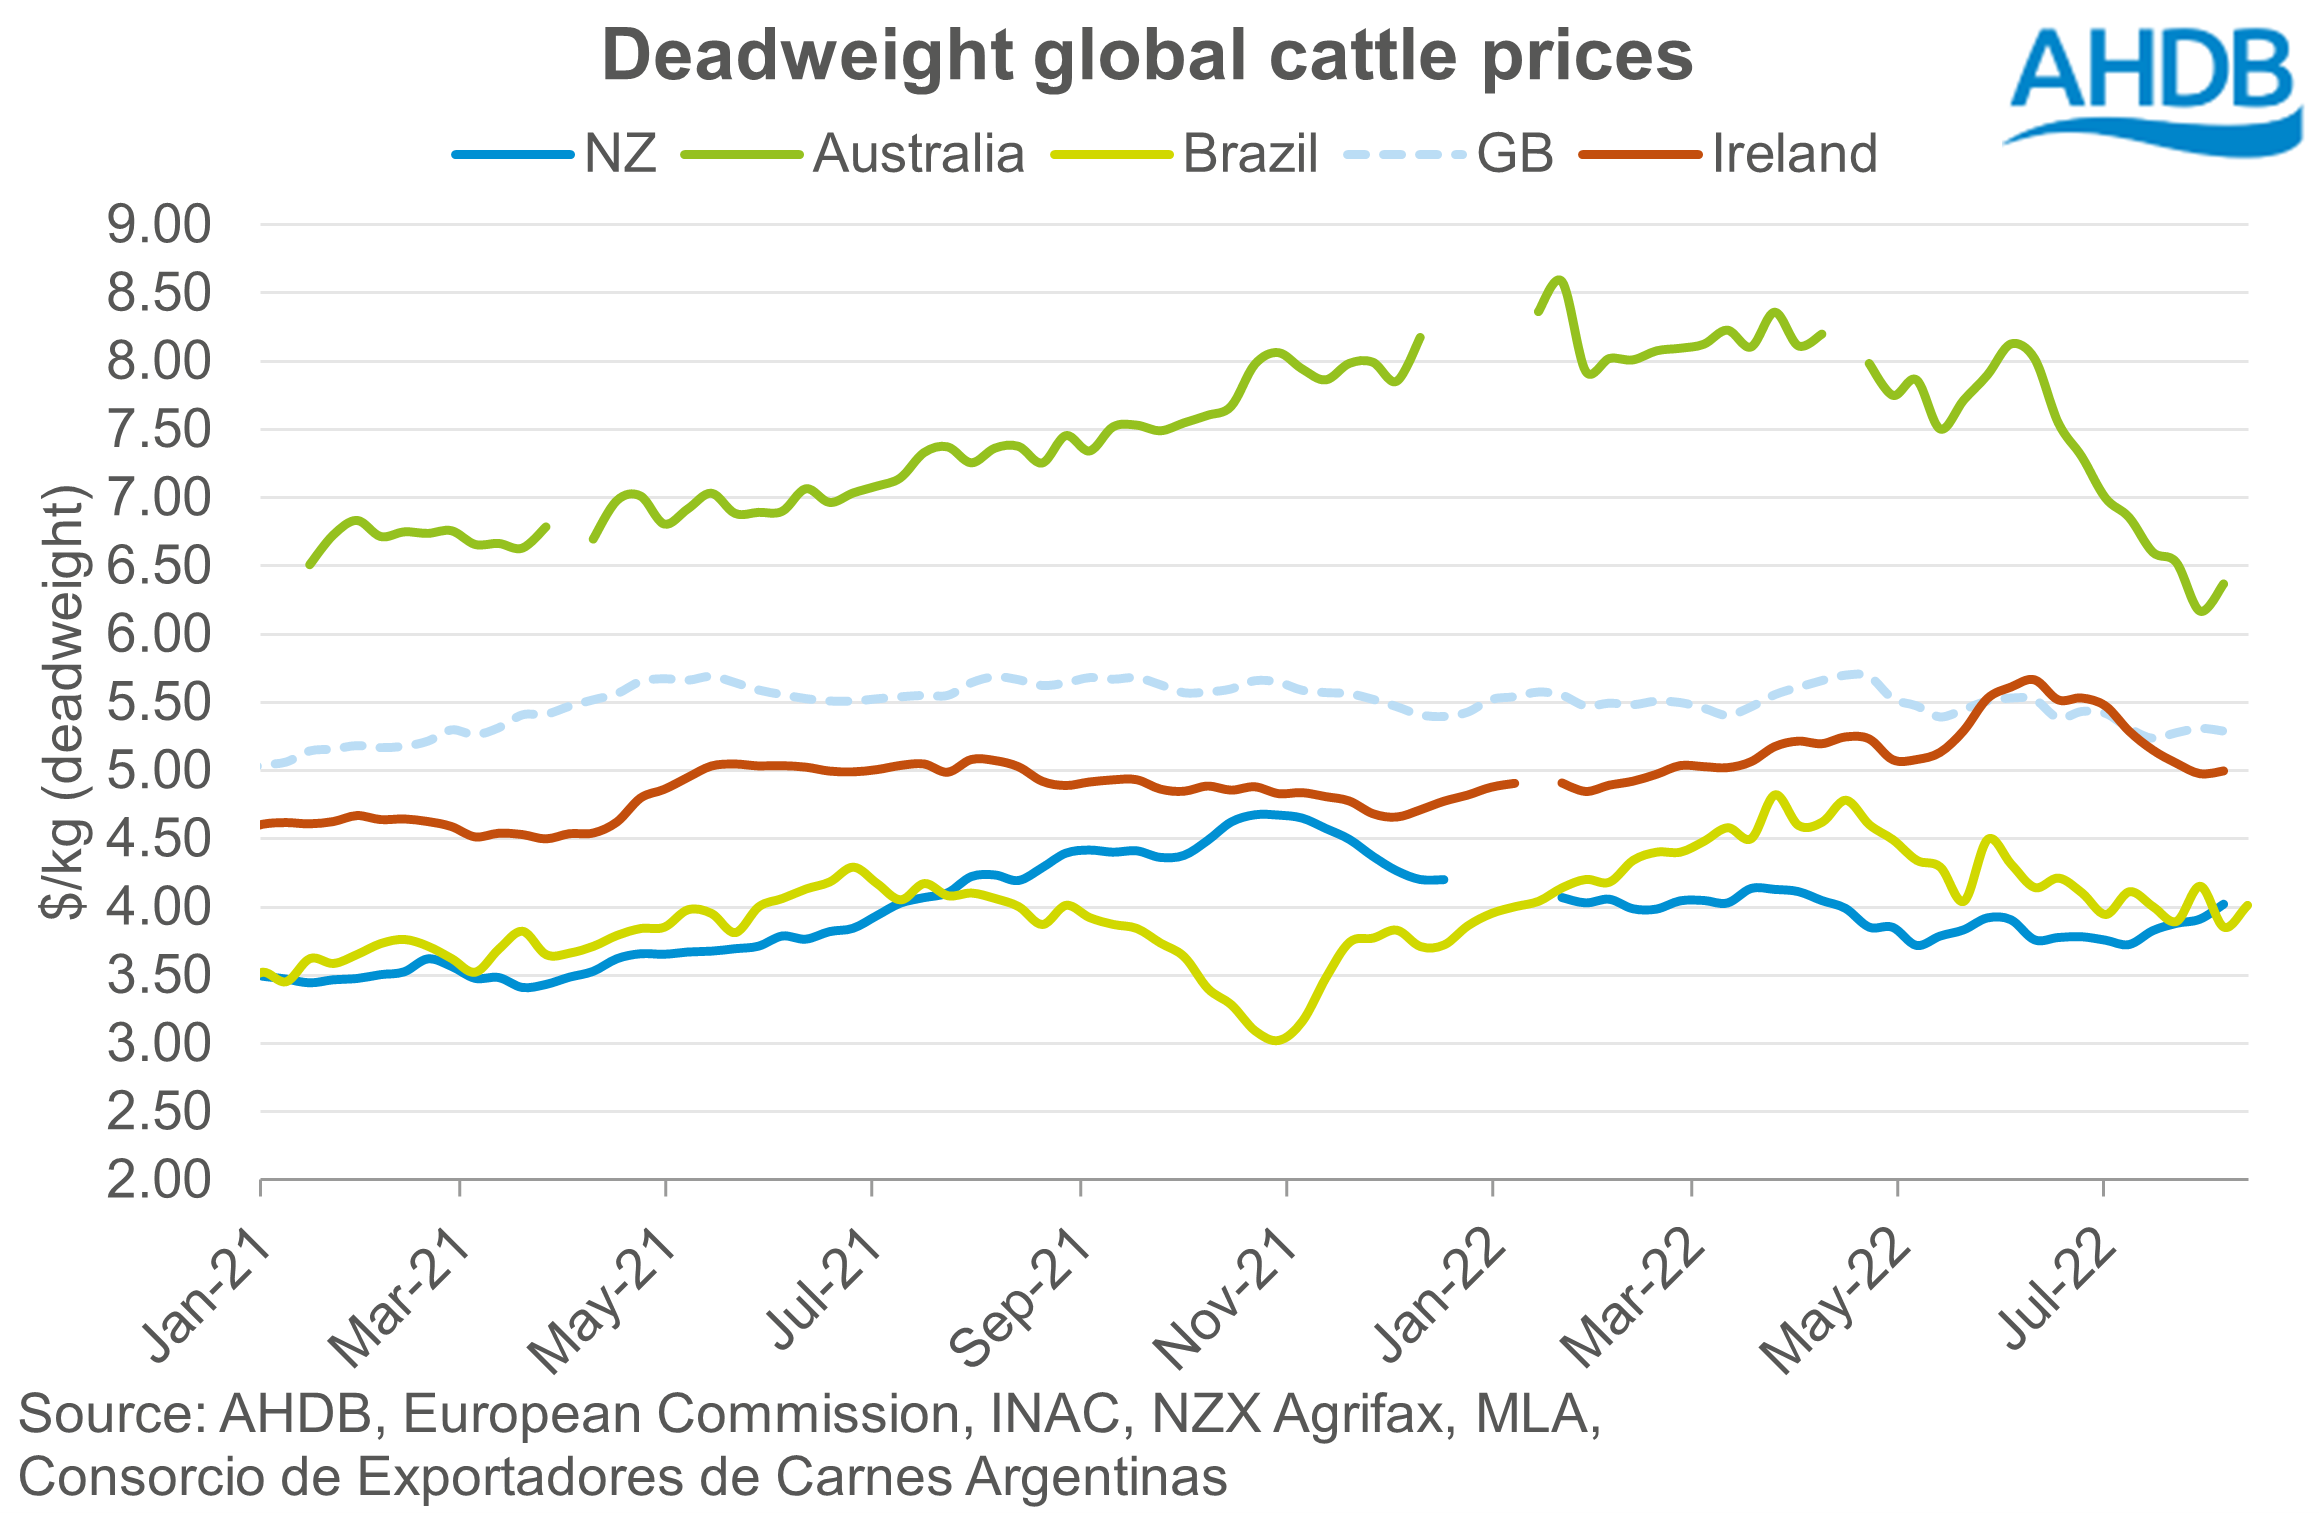 Graph showing weekly deadweight global cattle prices in USD